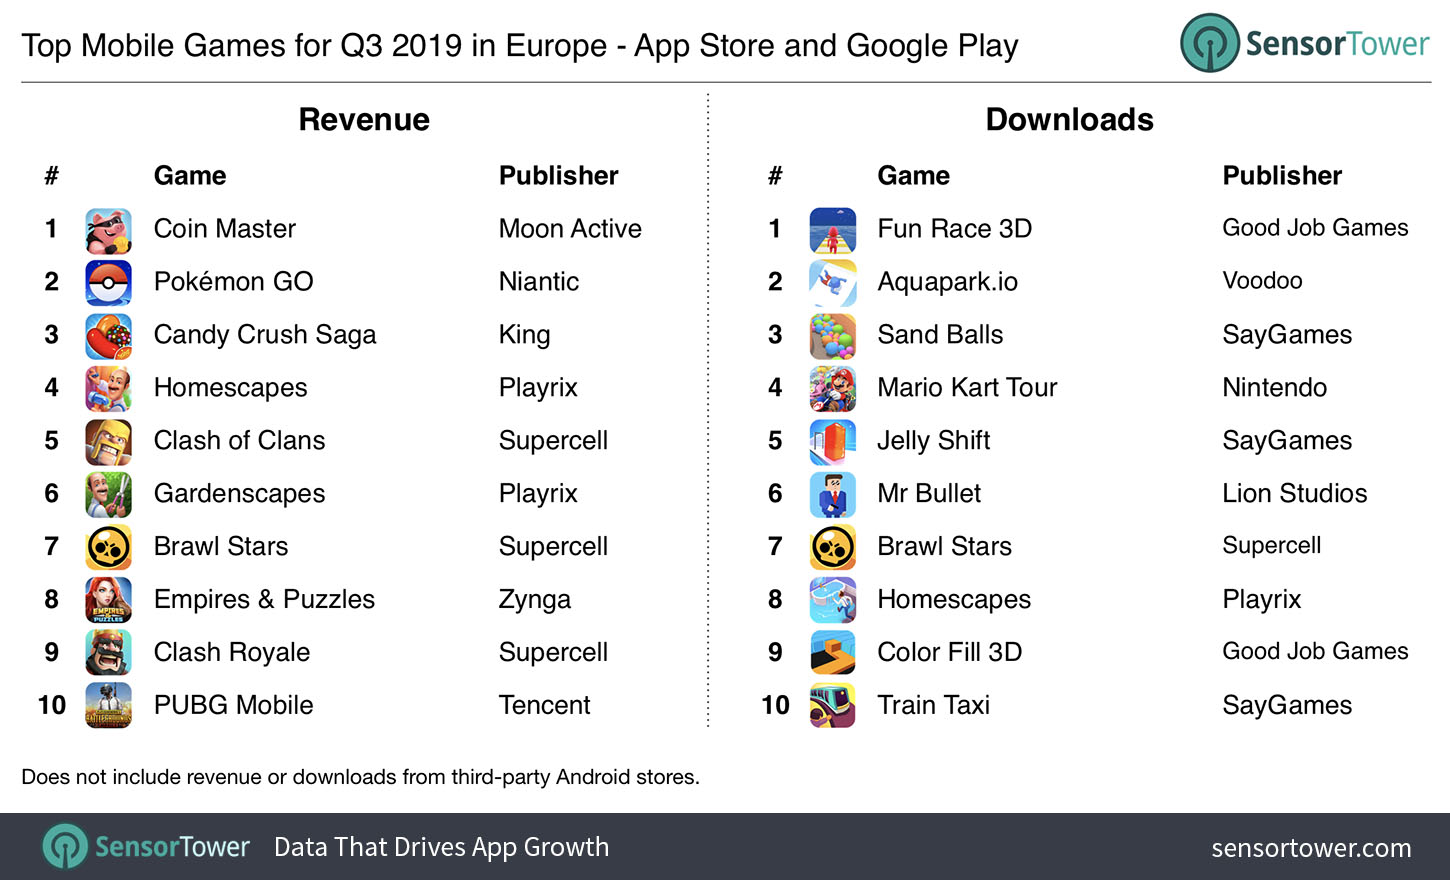 Q3 2019 Top Mobile Games for Europe